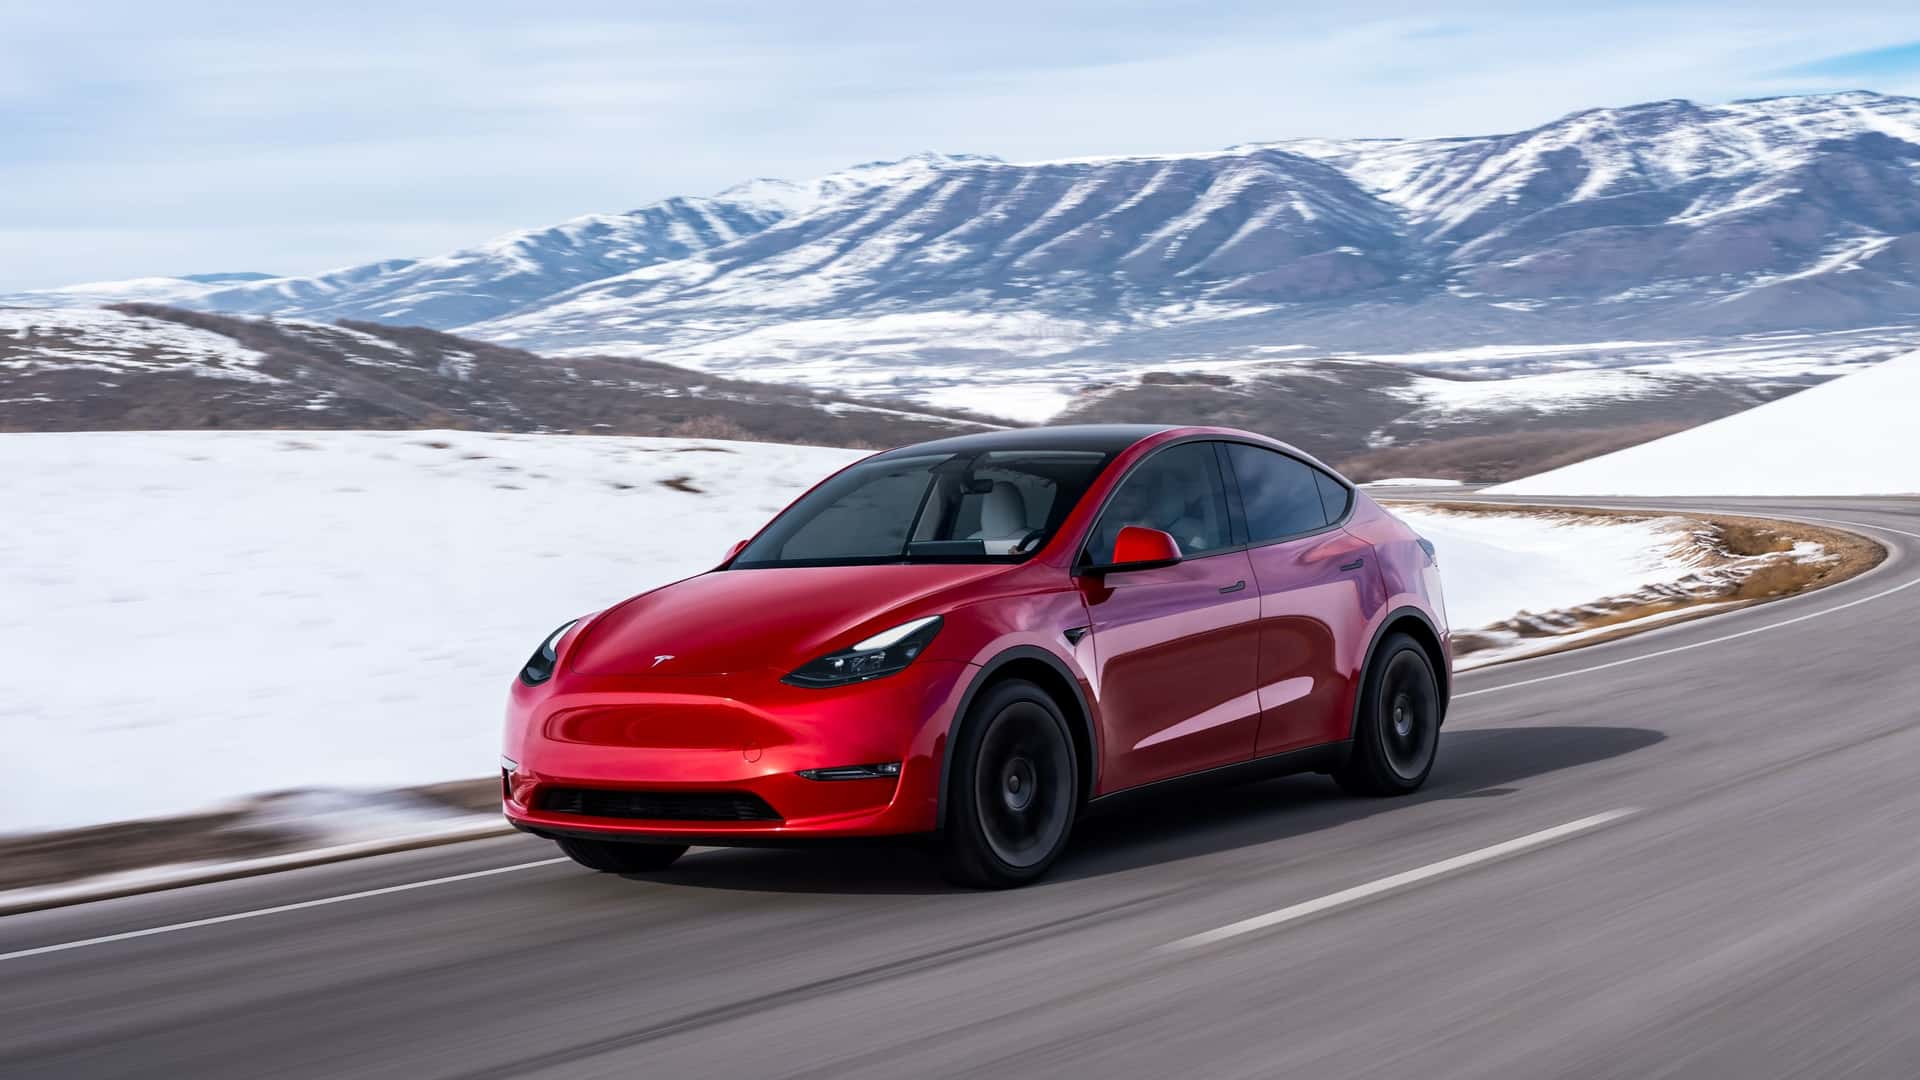 tesla model y fails to meet range claims year round: consumer reports